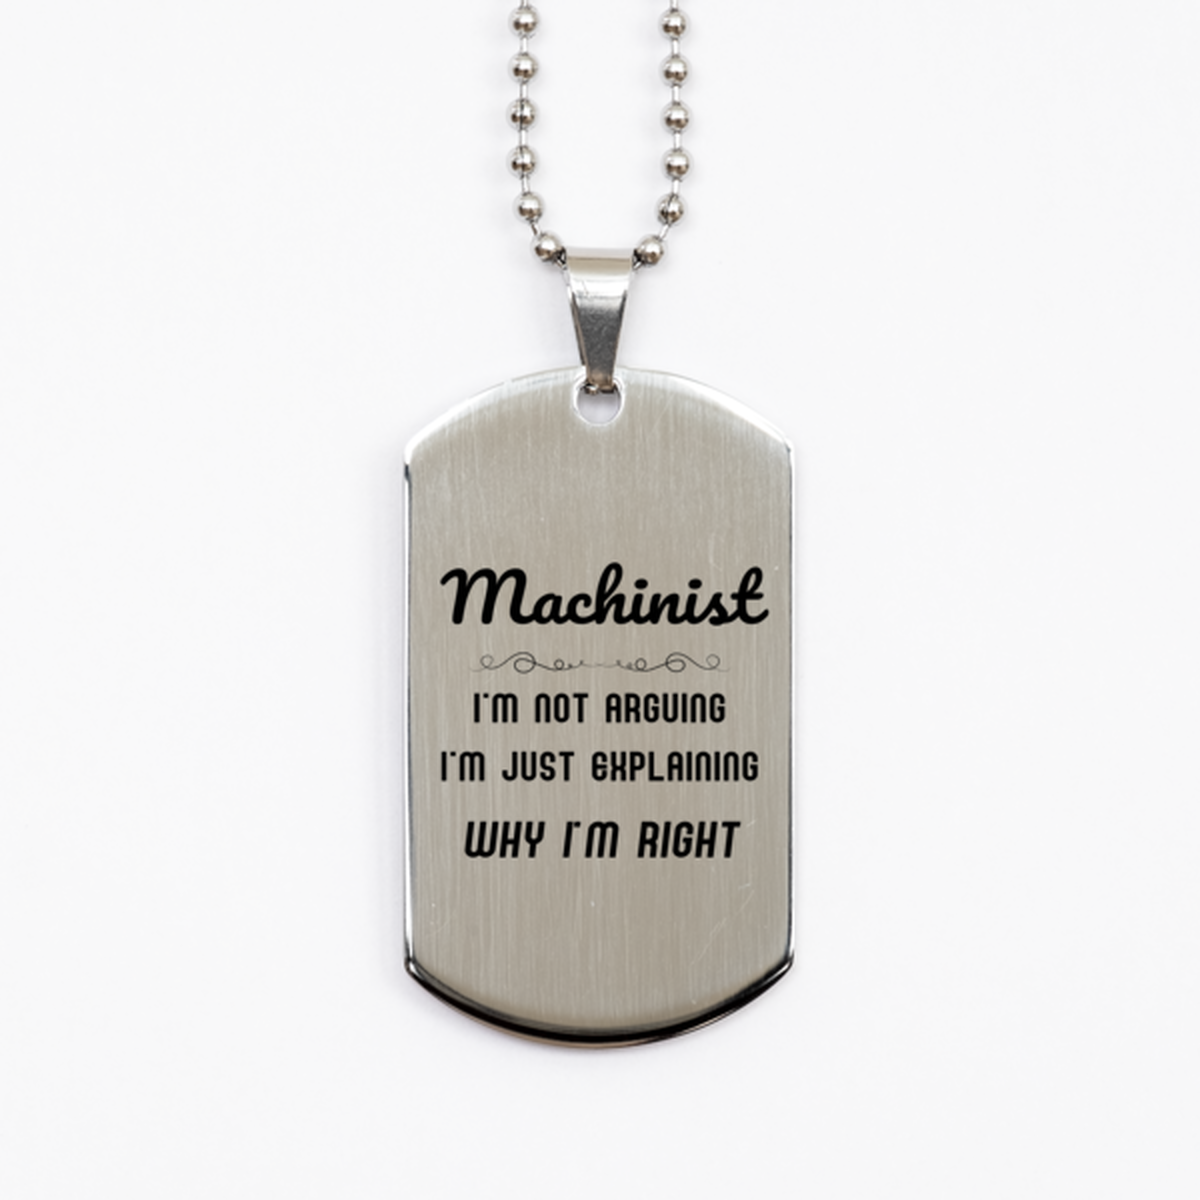 Machinist I'm not Arguing. I'm Just Explaining Why I'm RIGHT Silver Dog Tag, Funny Saying Quote Machinist Gifts For Machinist Graduation Birthday Christmas Gifts for Men Women Coworker